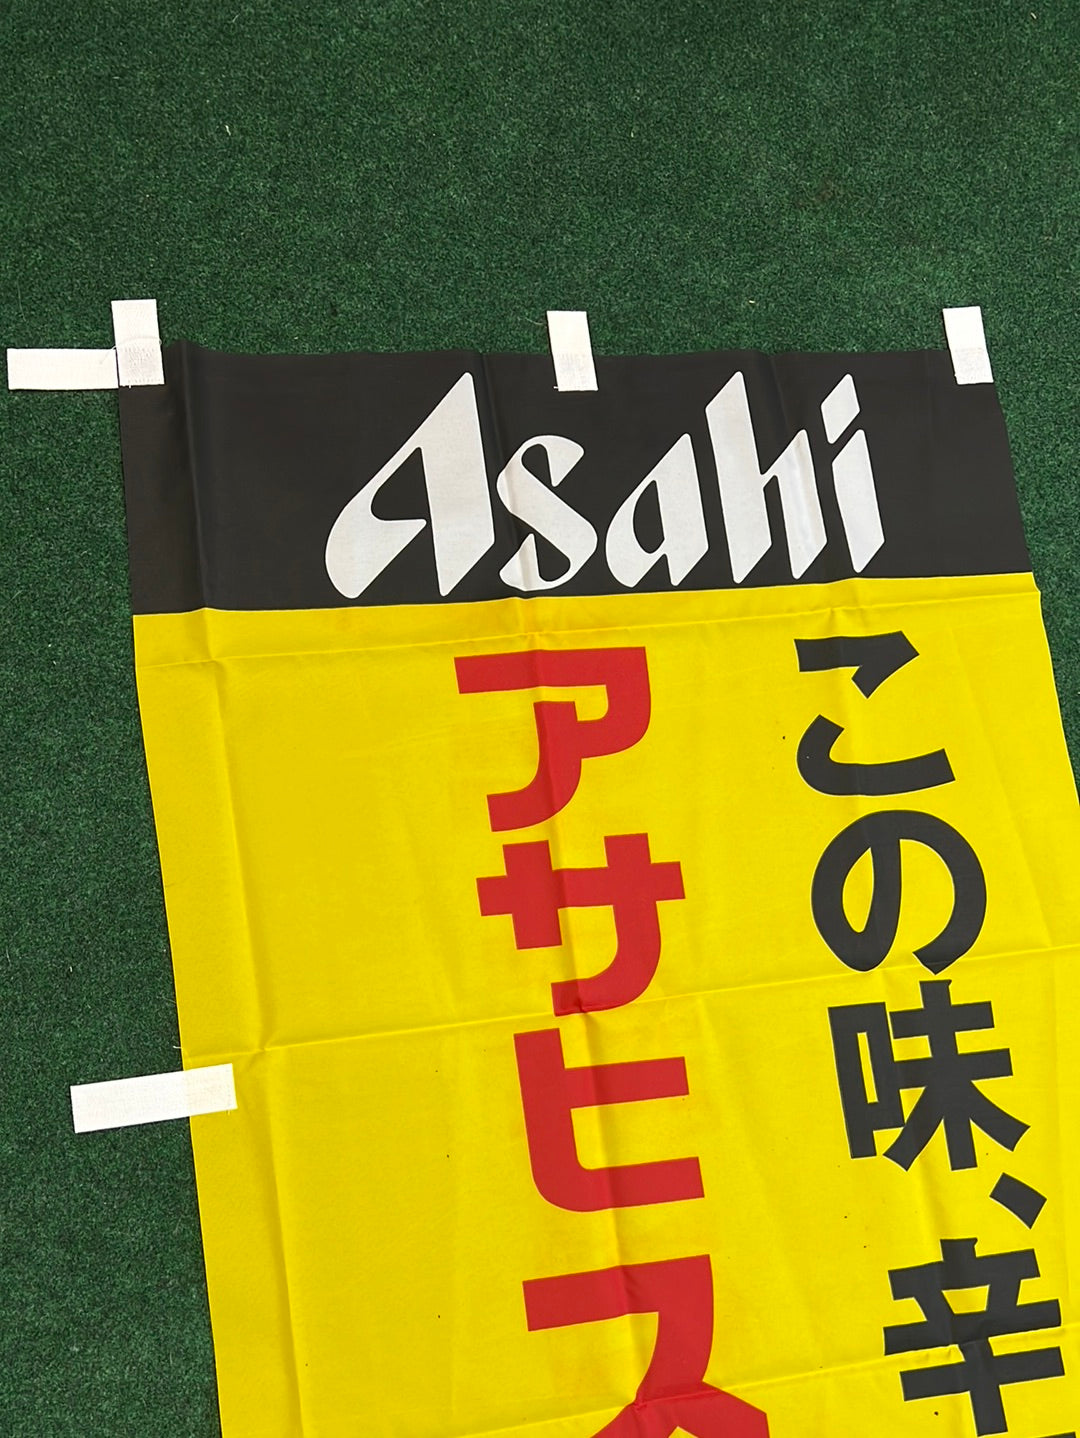 ASAHI Super Dry -Poster and "This Taste Is Dry" Advertising Nobori